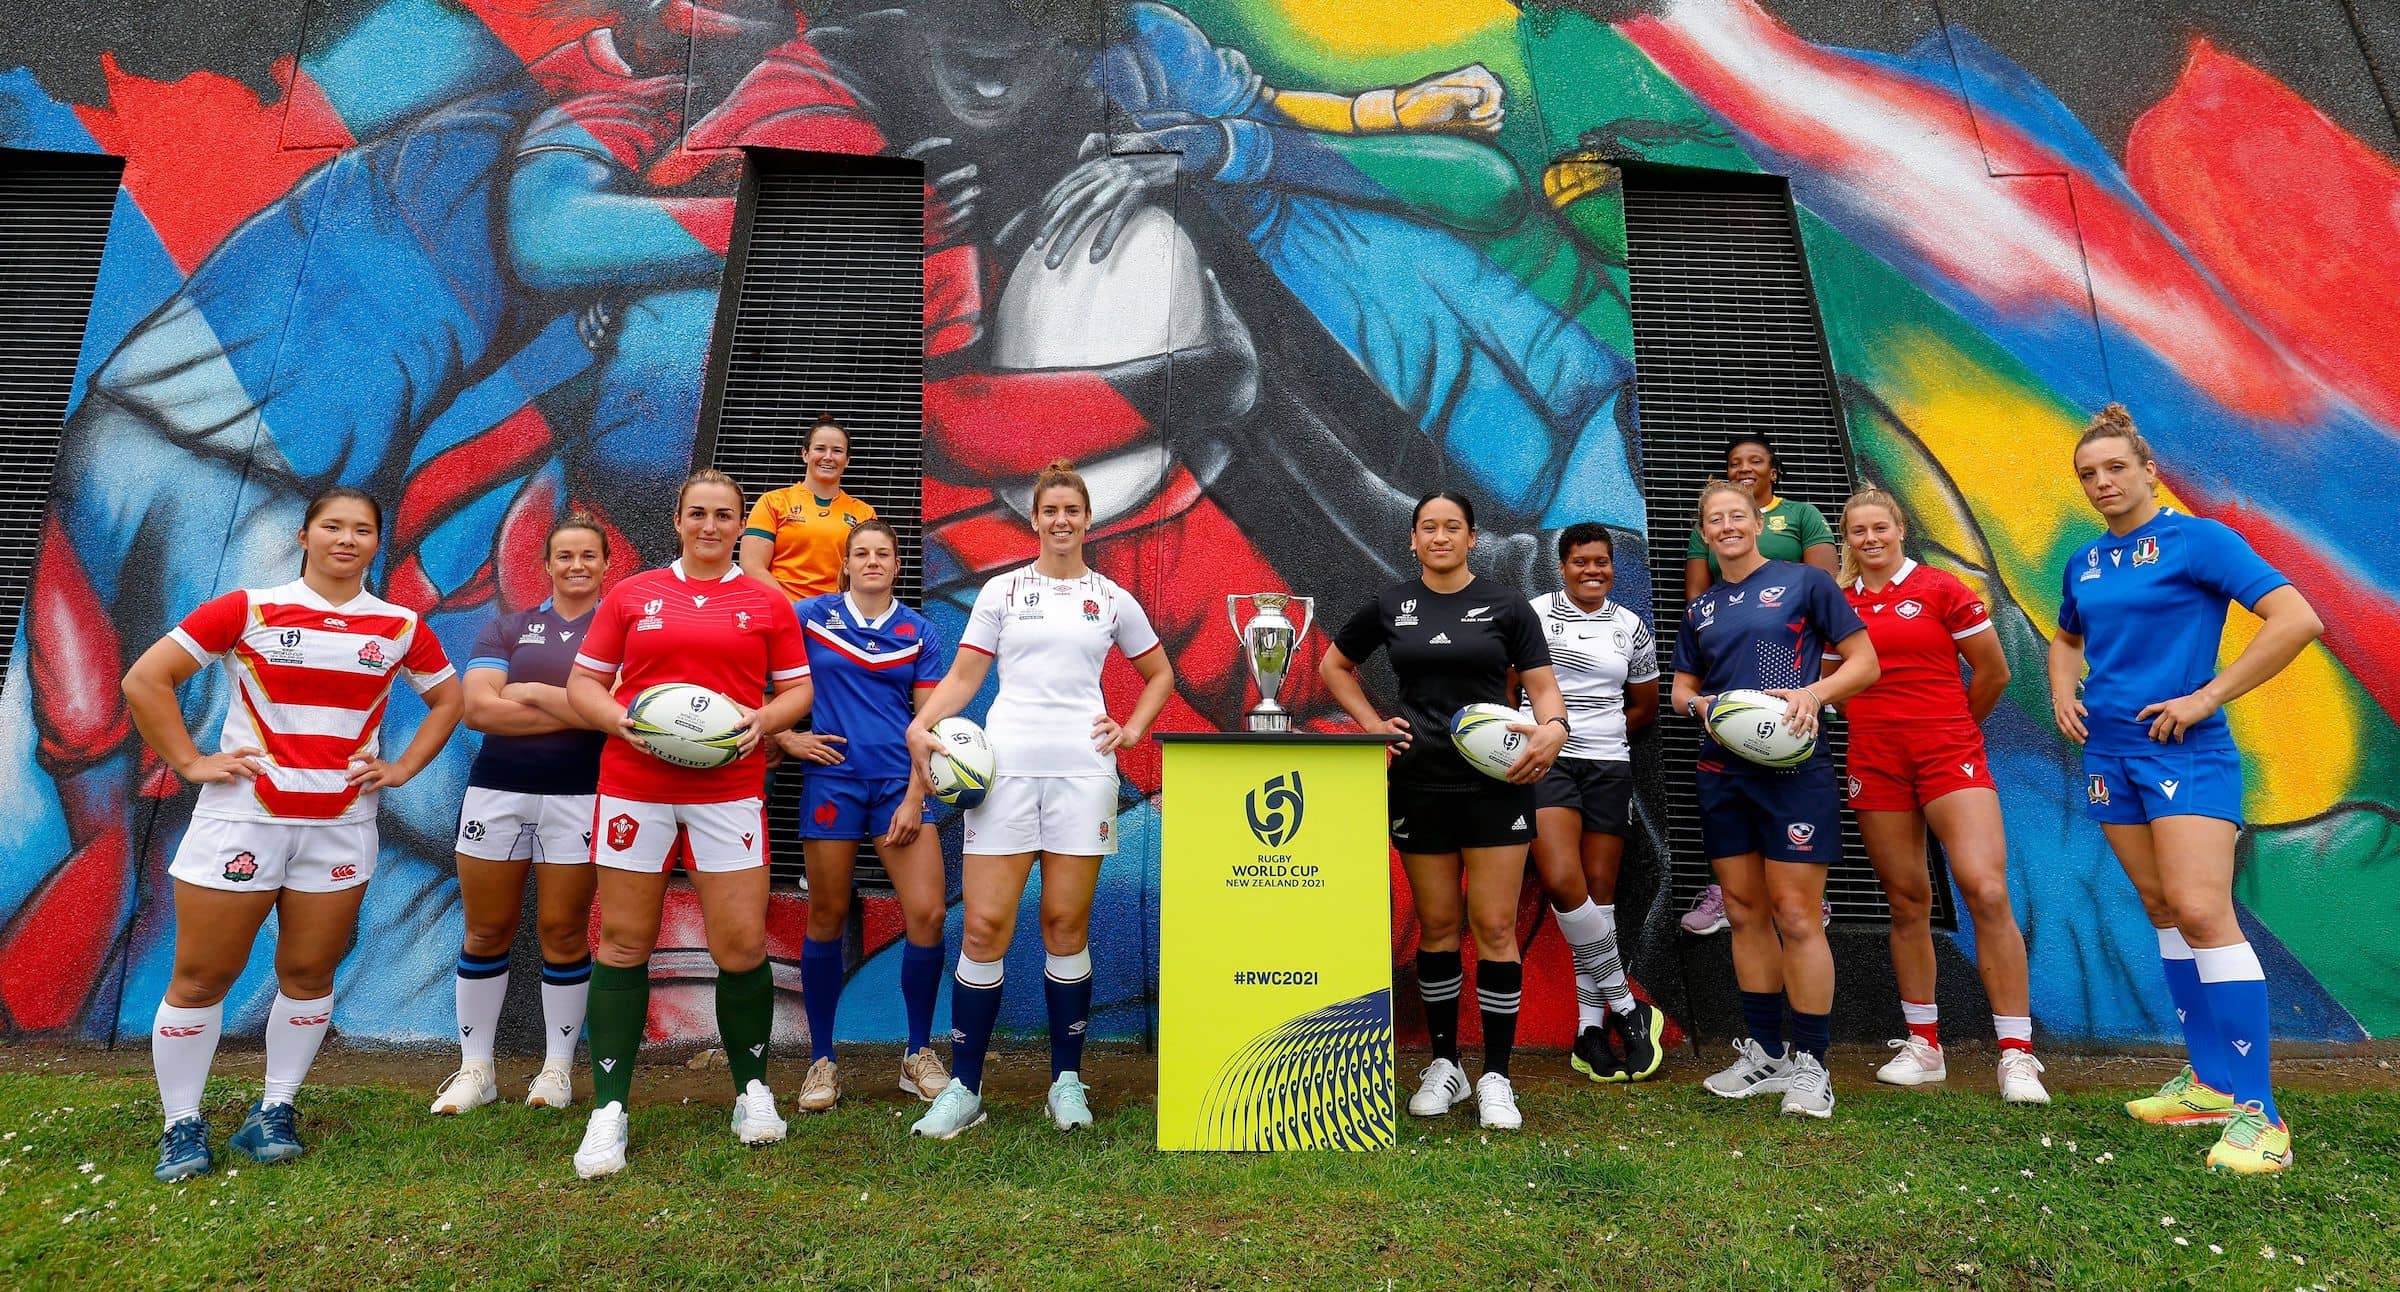 (l-r) rachel malcolm (scotland), saki minami (japan), siwan lillicrap (wales), shannon perry (australia), gaelle hermet (france), sarah hunter (england), kennedy simon (new zealand), sereima leweniqila (fiji), kate zackary (usa), nolusindiso booi (south africa), sophie de goede (canada) and elisa giordano (italy) pose in front of a mural specially created for the tournament during the rugby world cup 2021 captains' photocall at eden park on 2 october, 2022 in auckland, new zealand. (photo by hagen hopkins - world rugby/world rugby